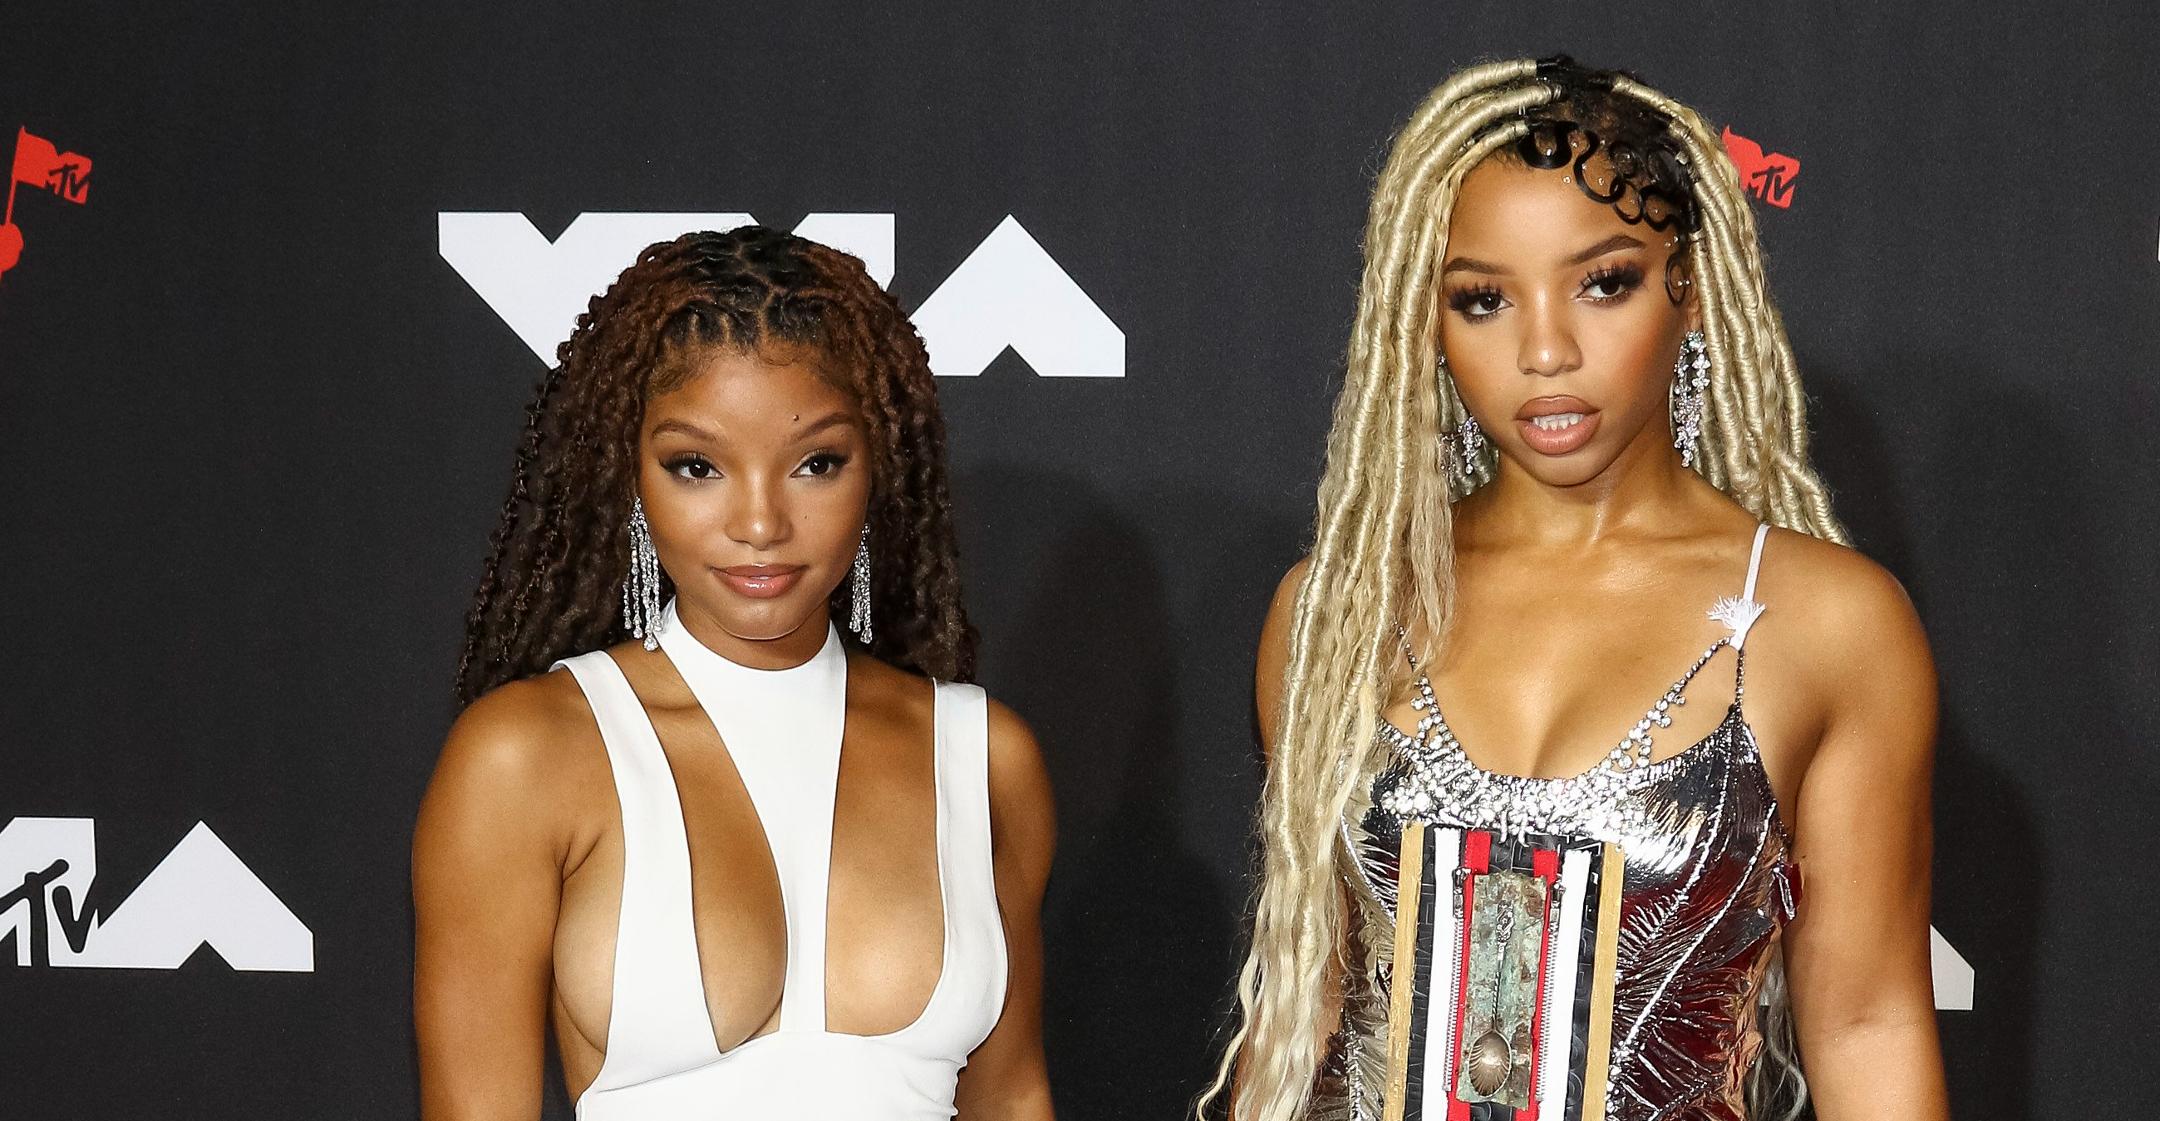 Chloe x Halle Partner With VS Pink on a Line of T-Shirts